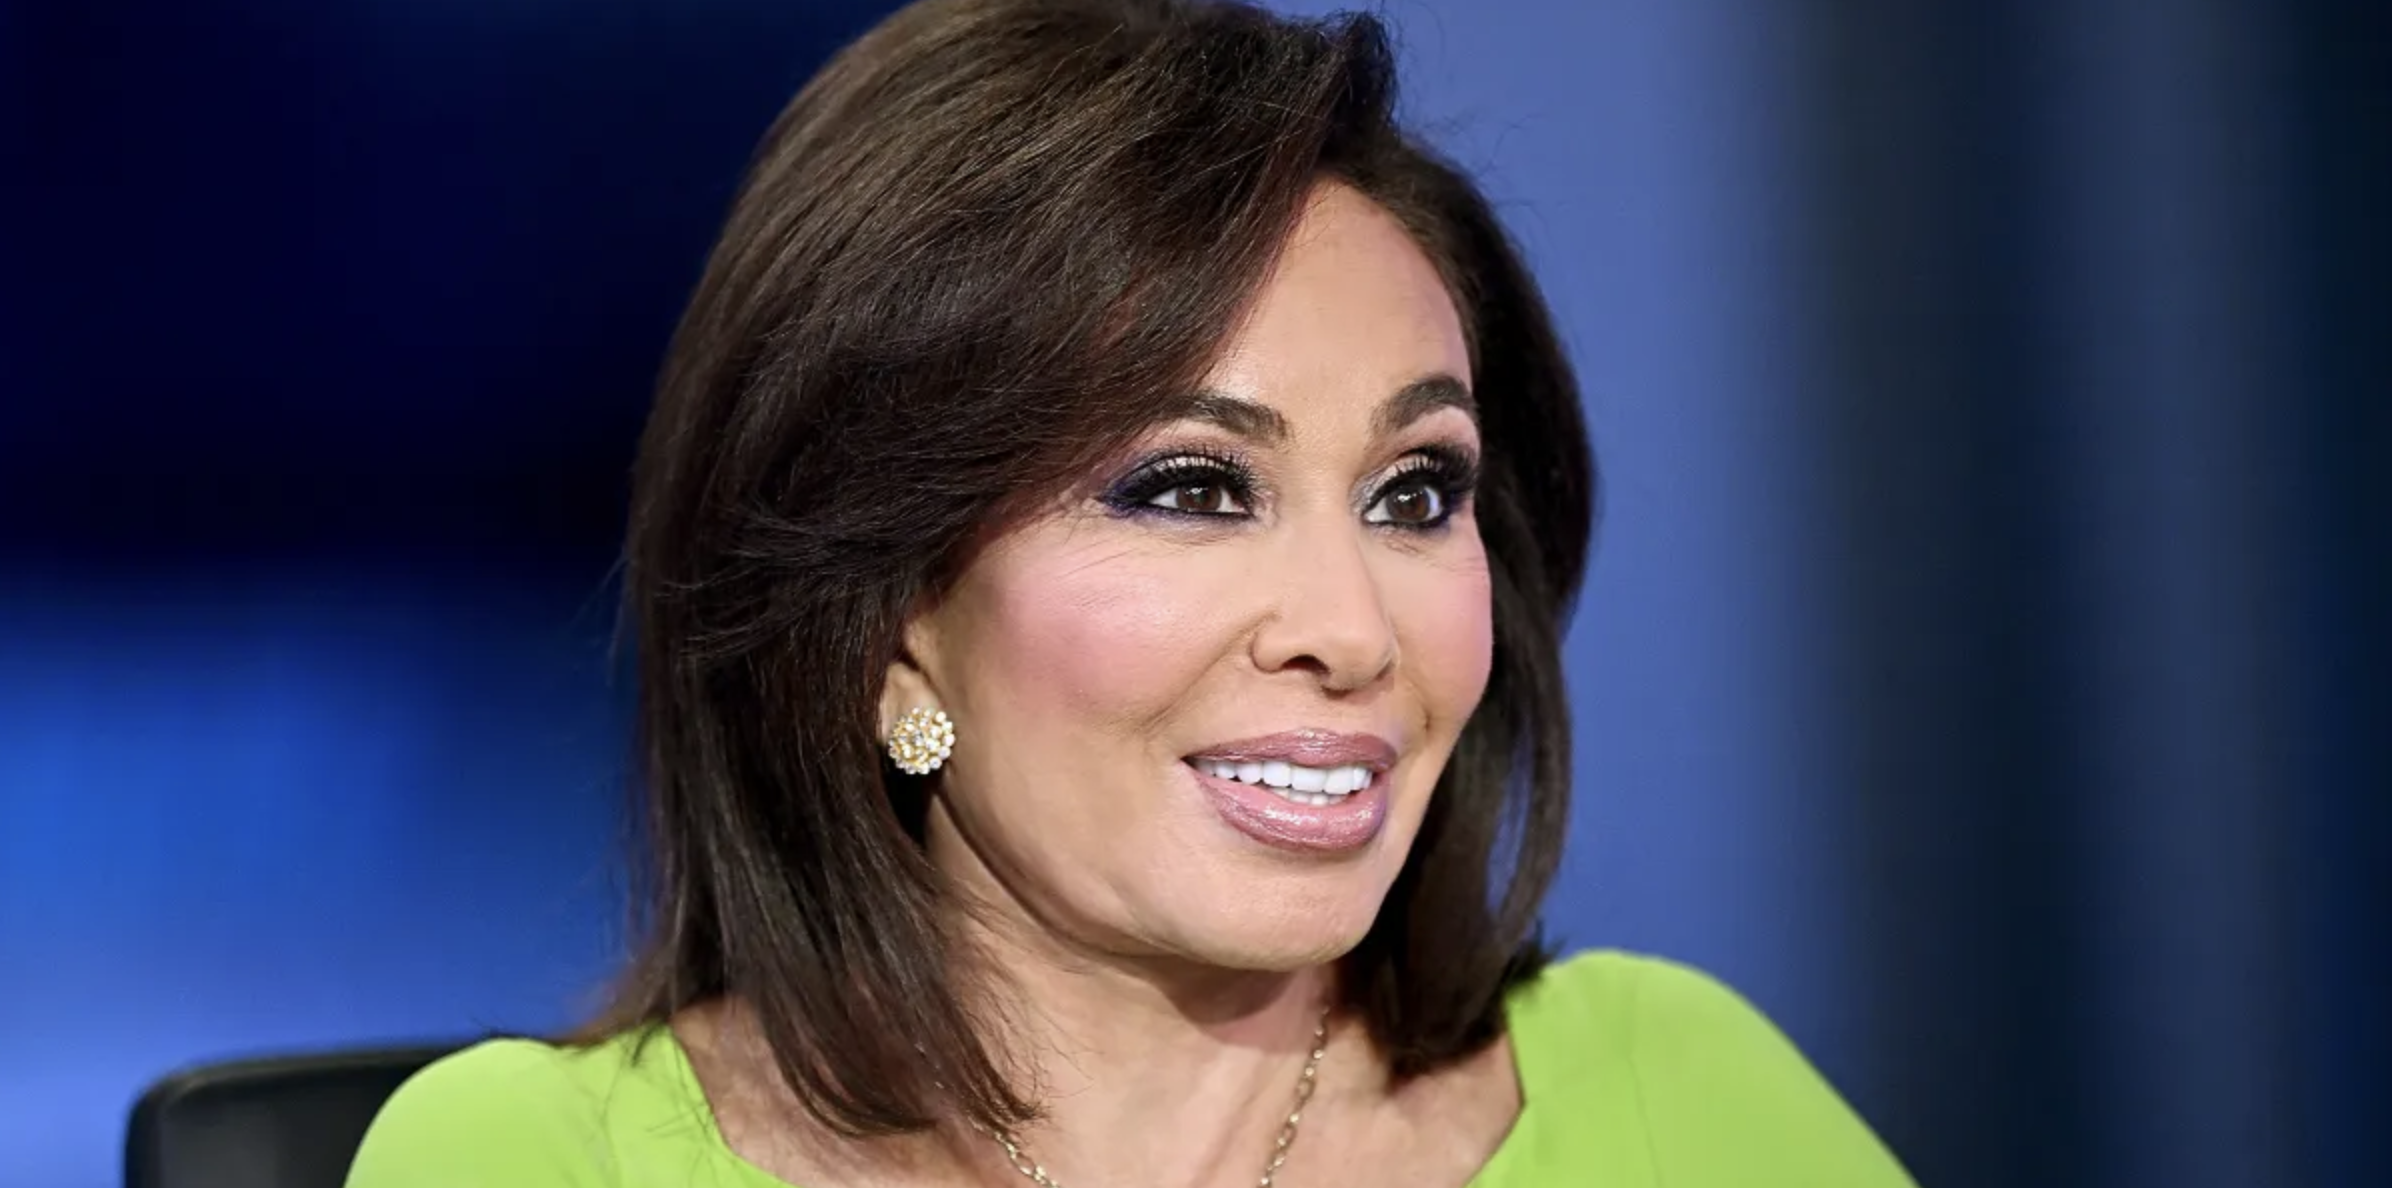 Judge Jeanine Pirro | Source: Getty Images